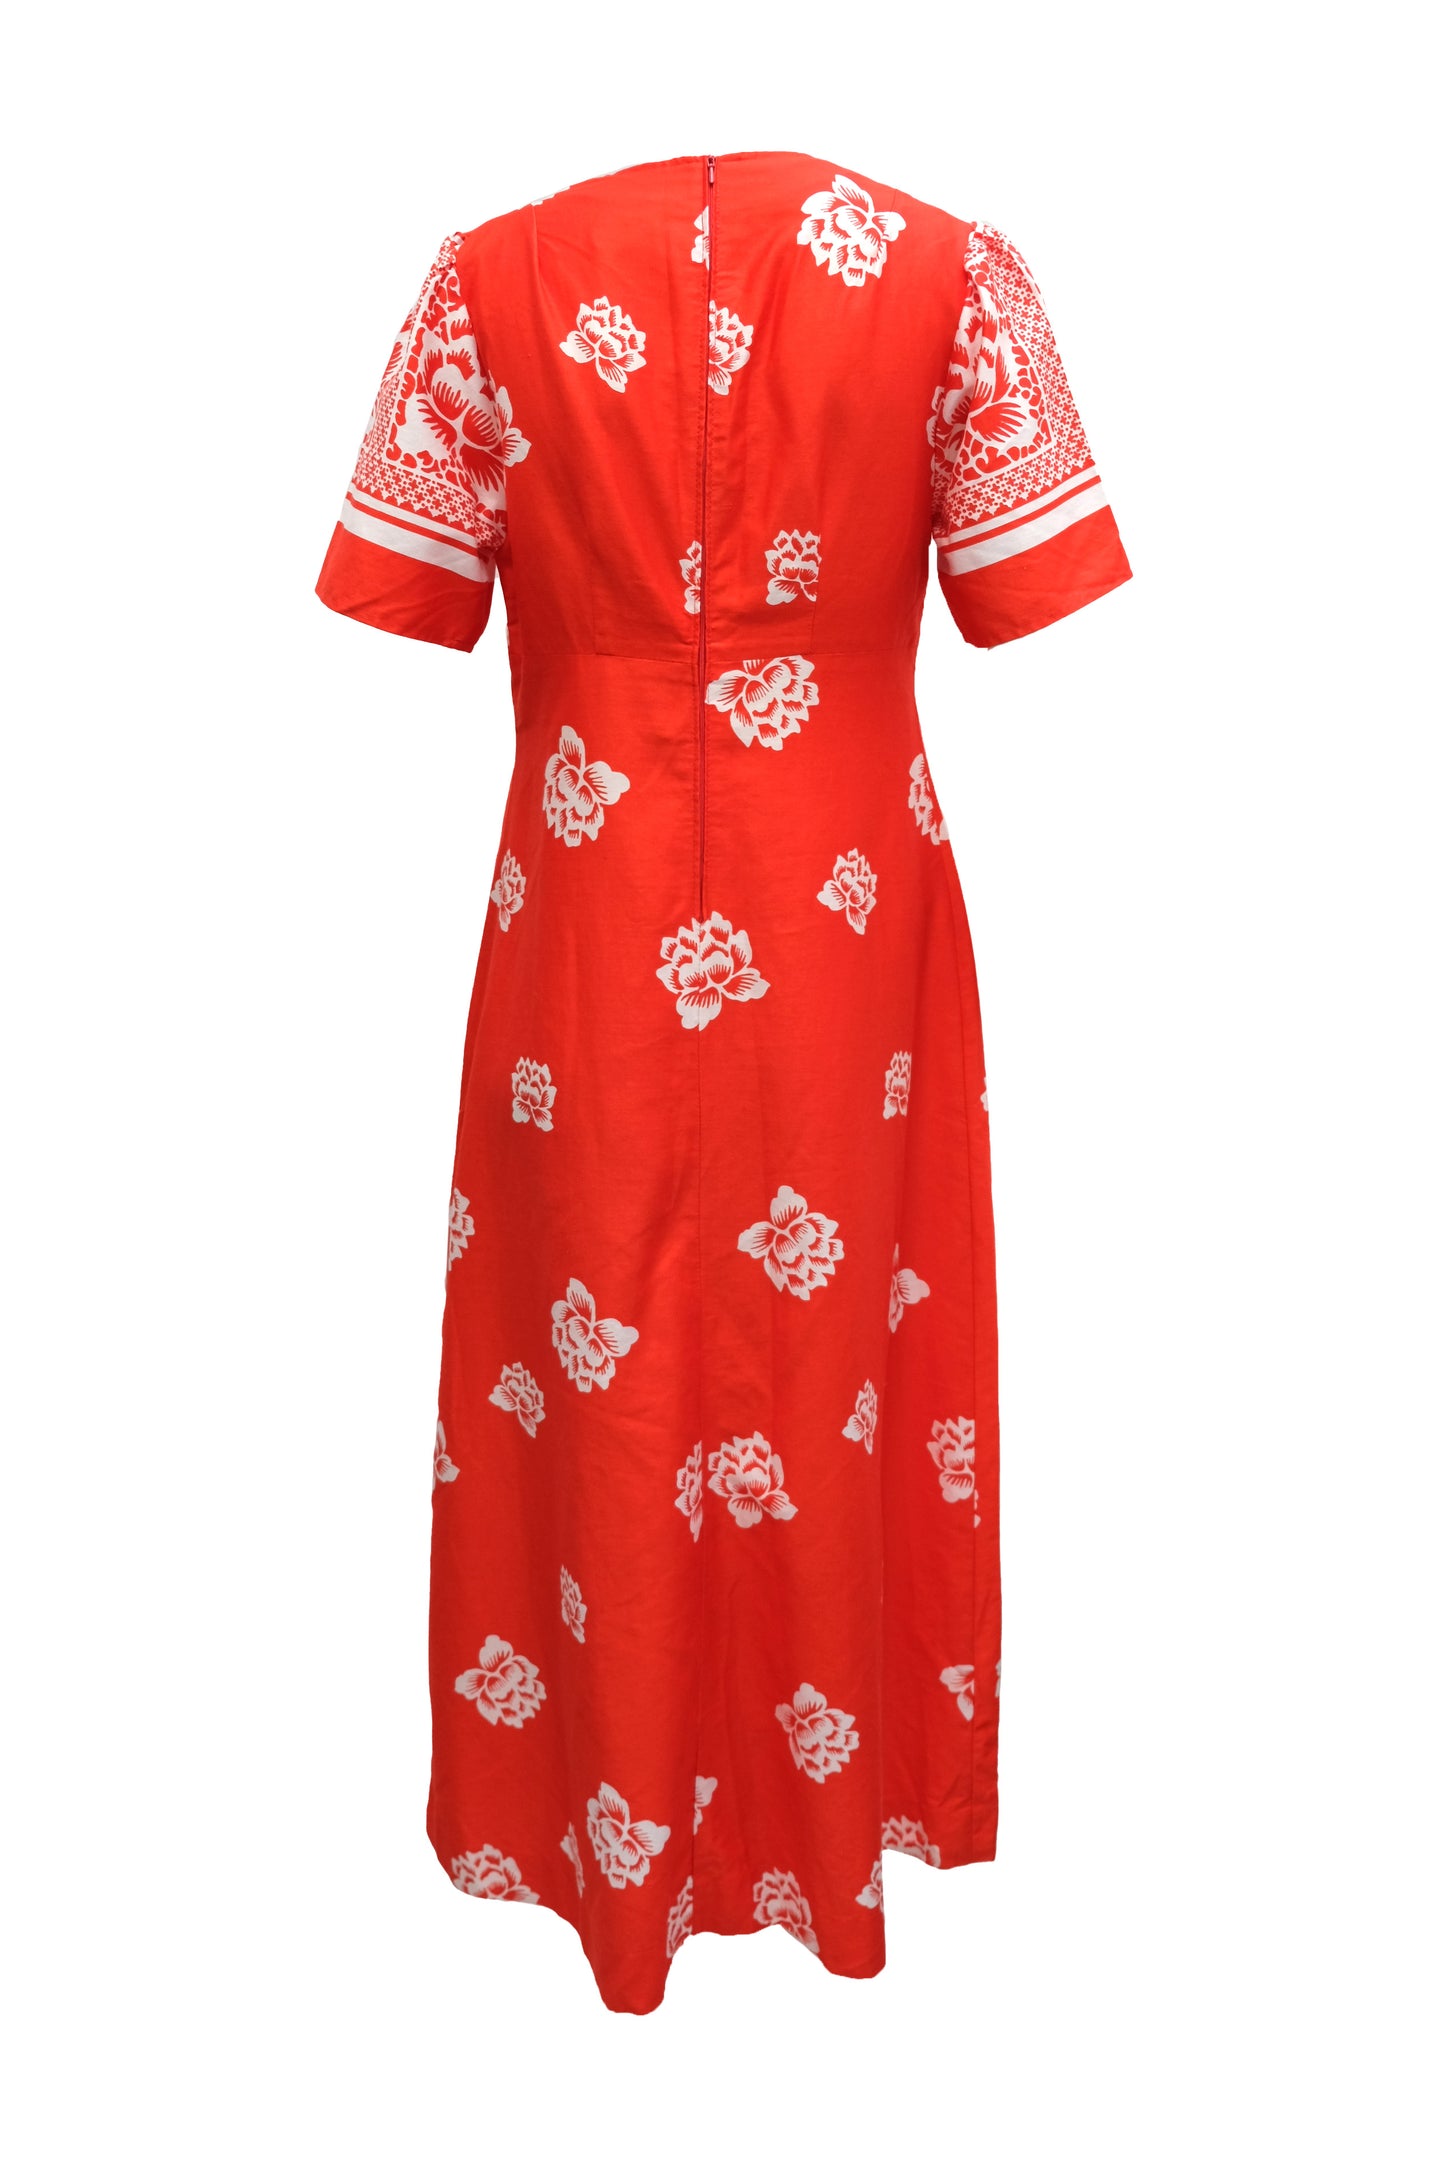 Mid Century Danish Maxi Dress in Red cotton with Floral Print, UK12-14